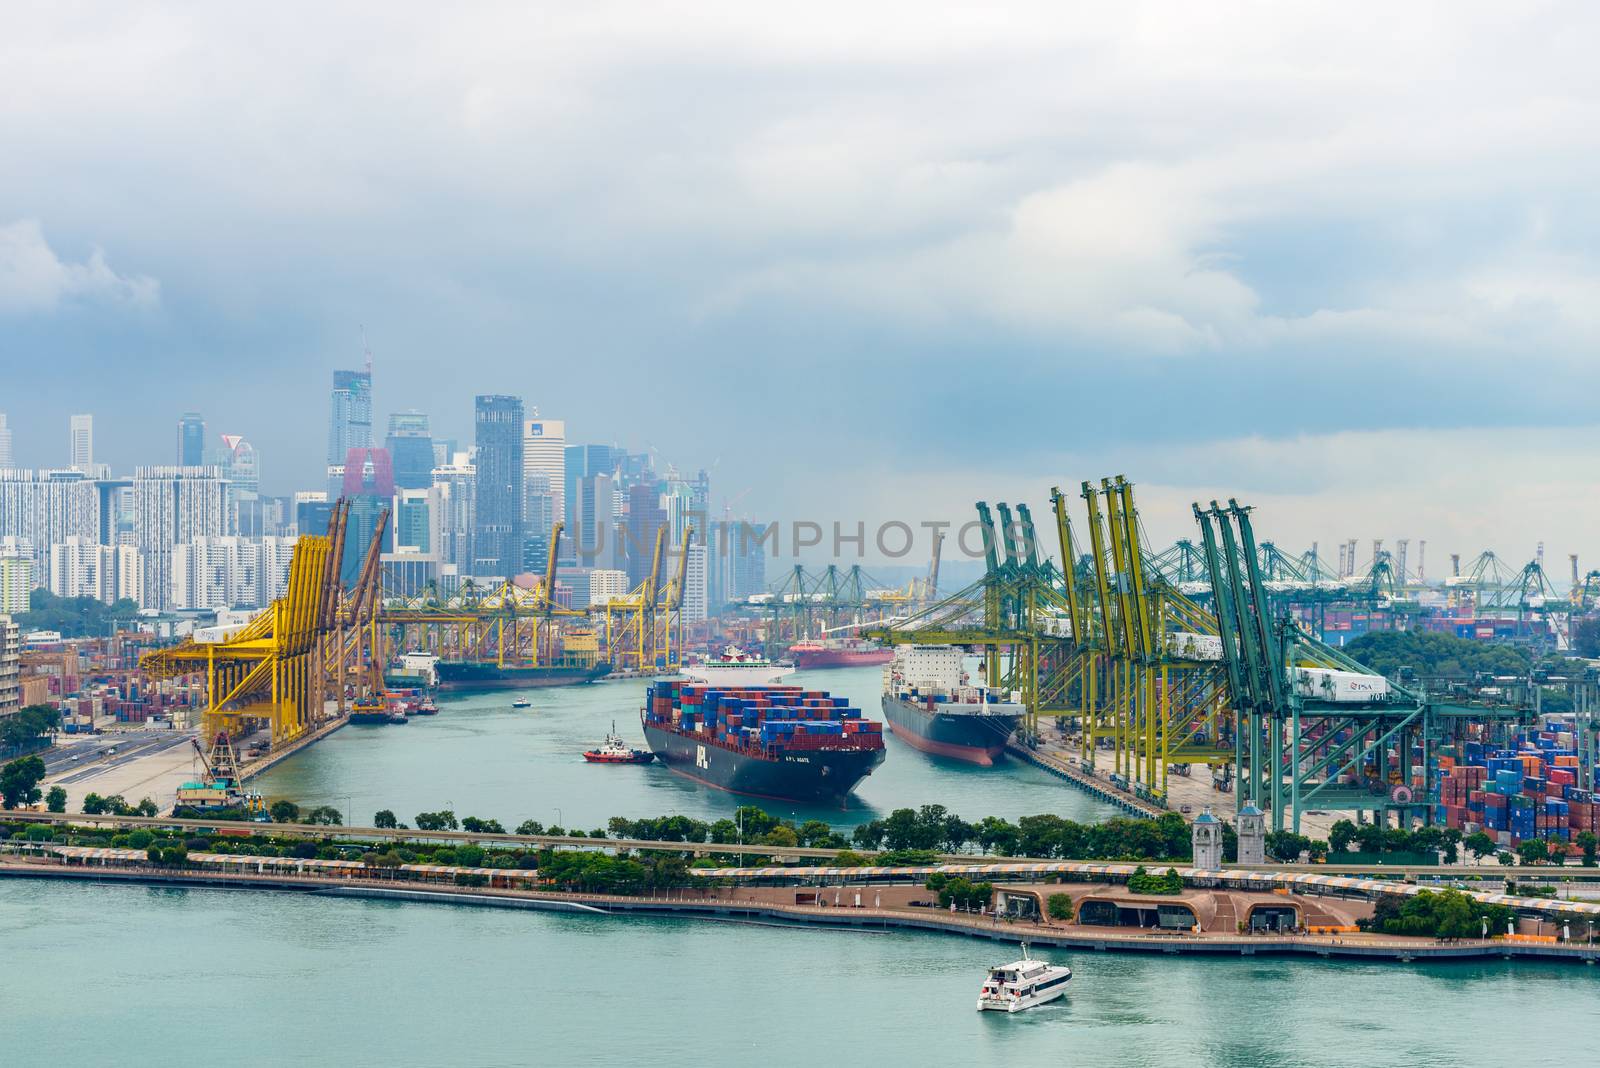 View on Keppel Harbour from Singapore cable car. by dutourdumonde